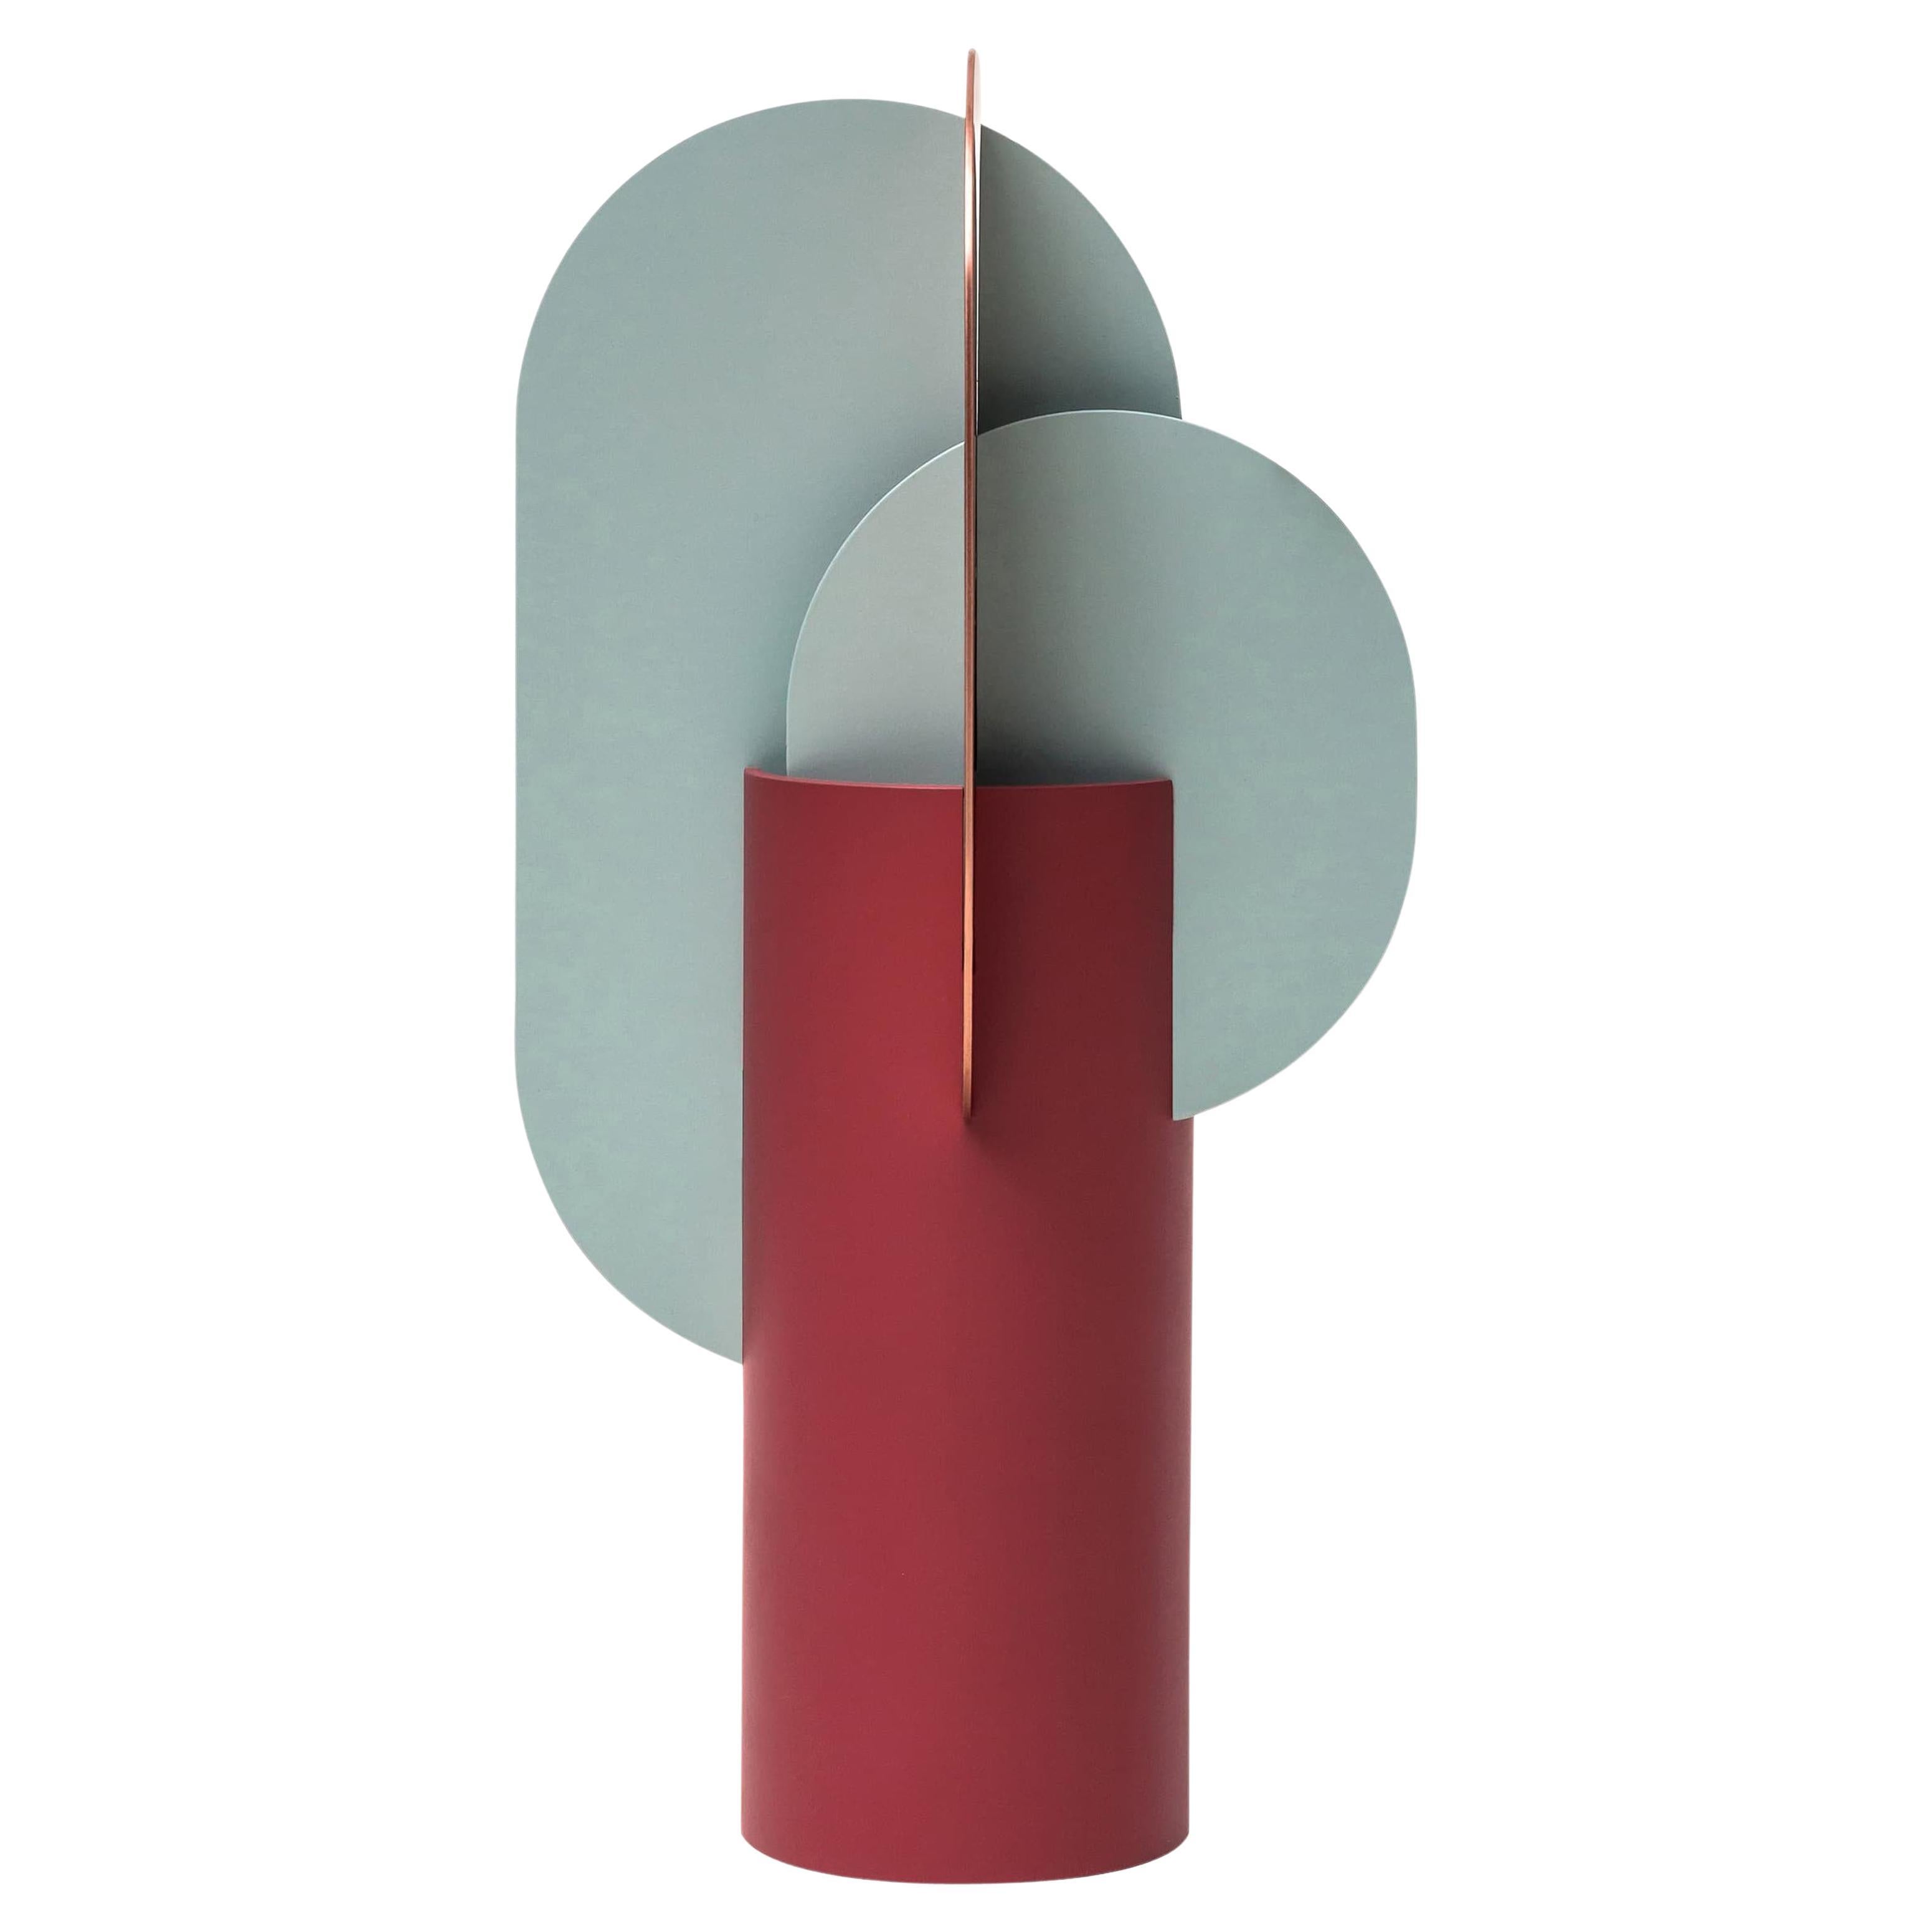 Contemporary Metal Vase 'Ekster CS1' by Noom, Copper and Steel